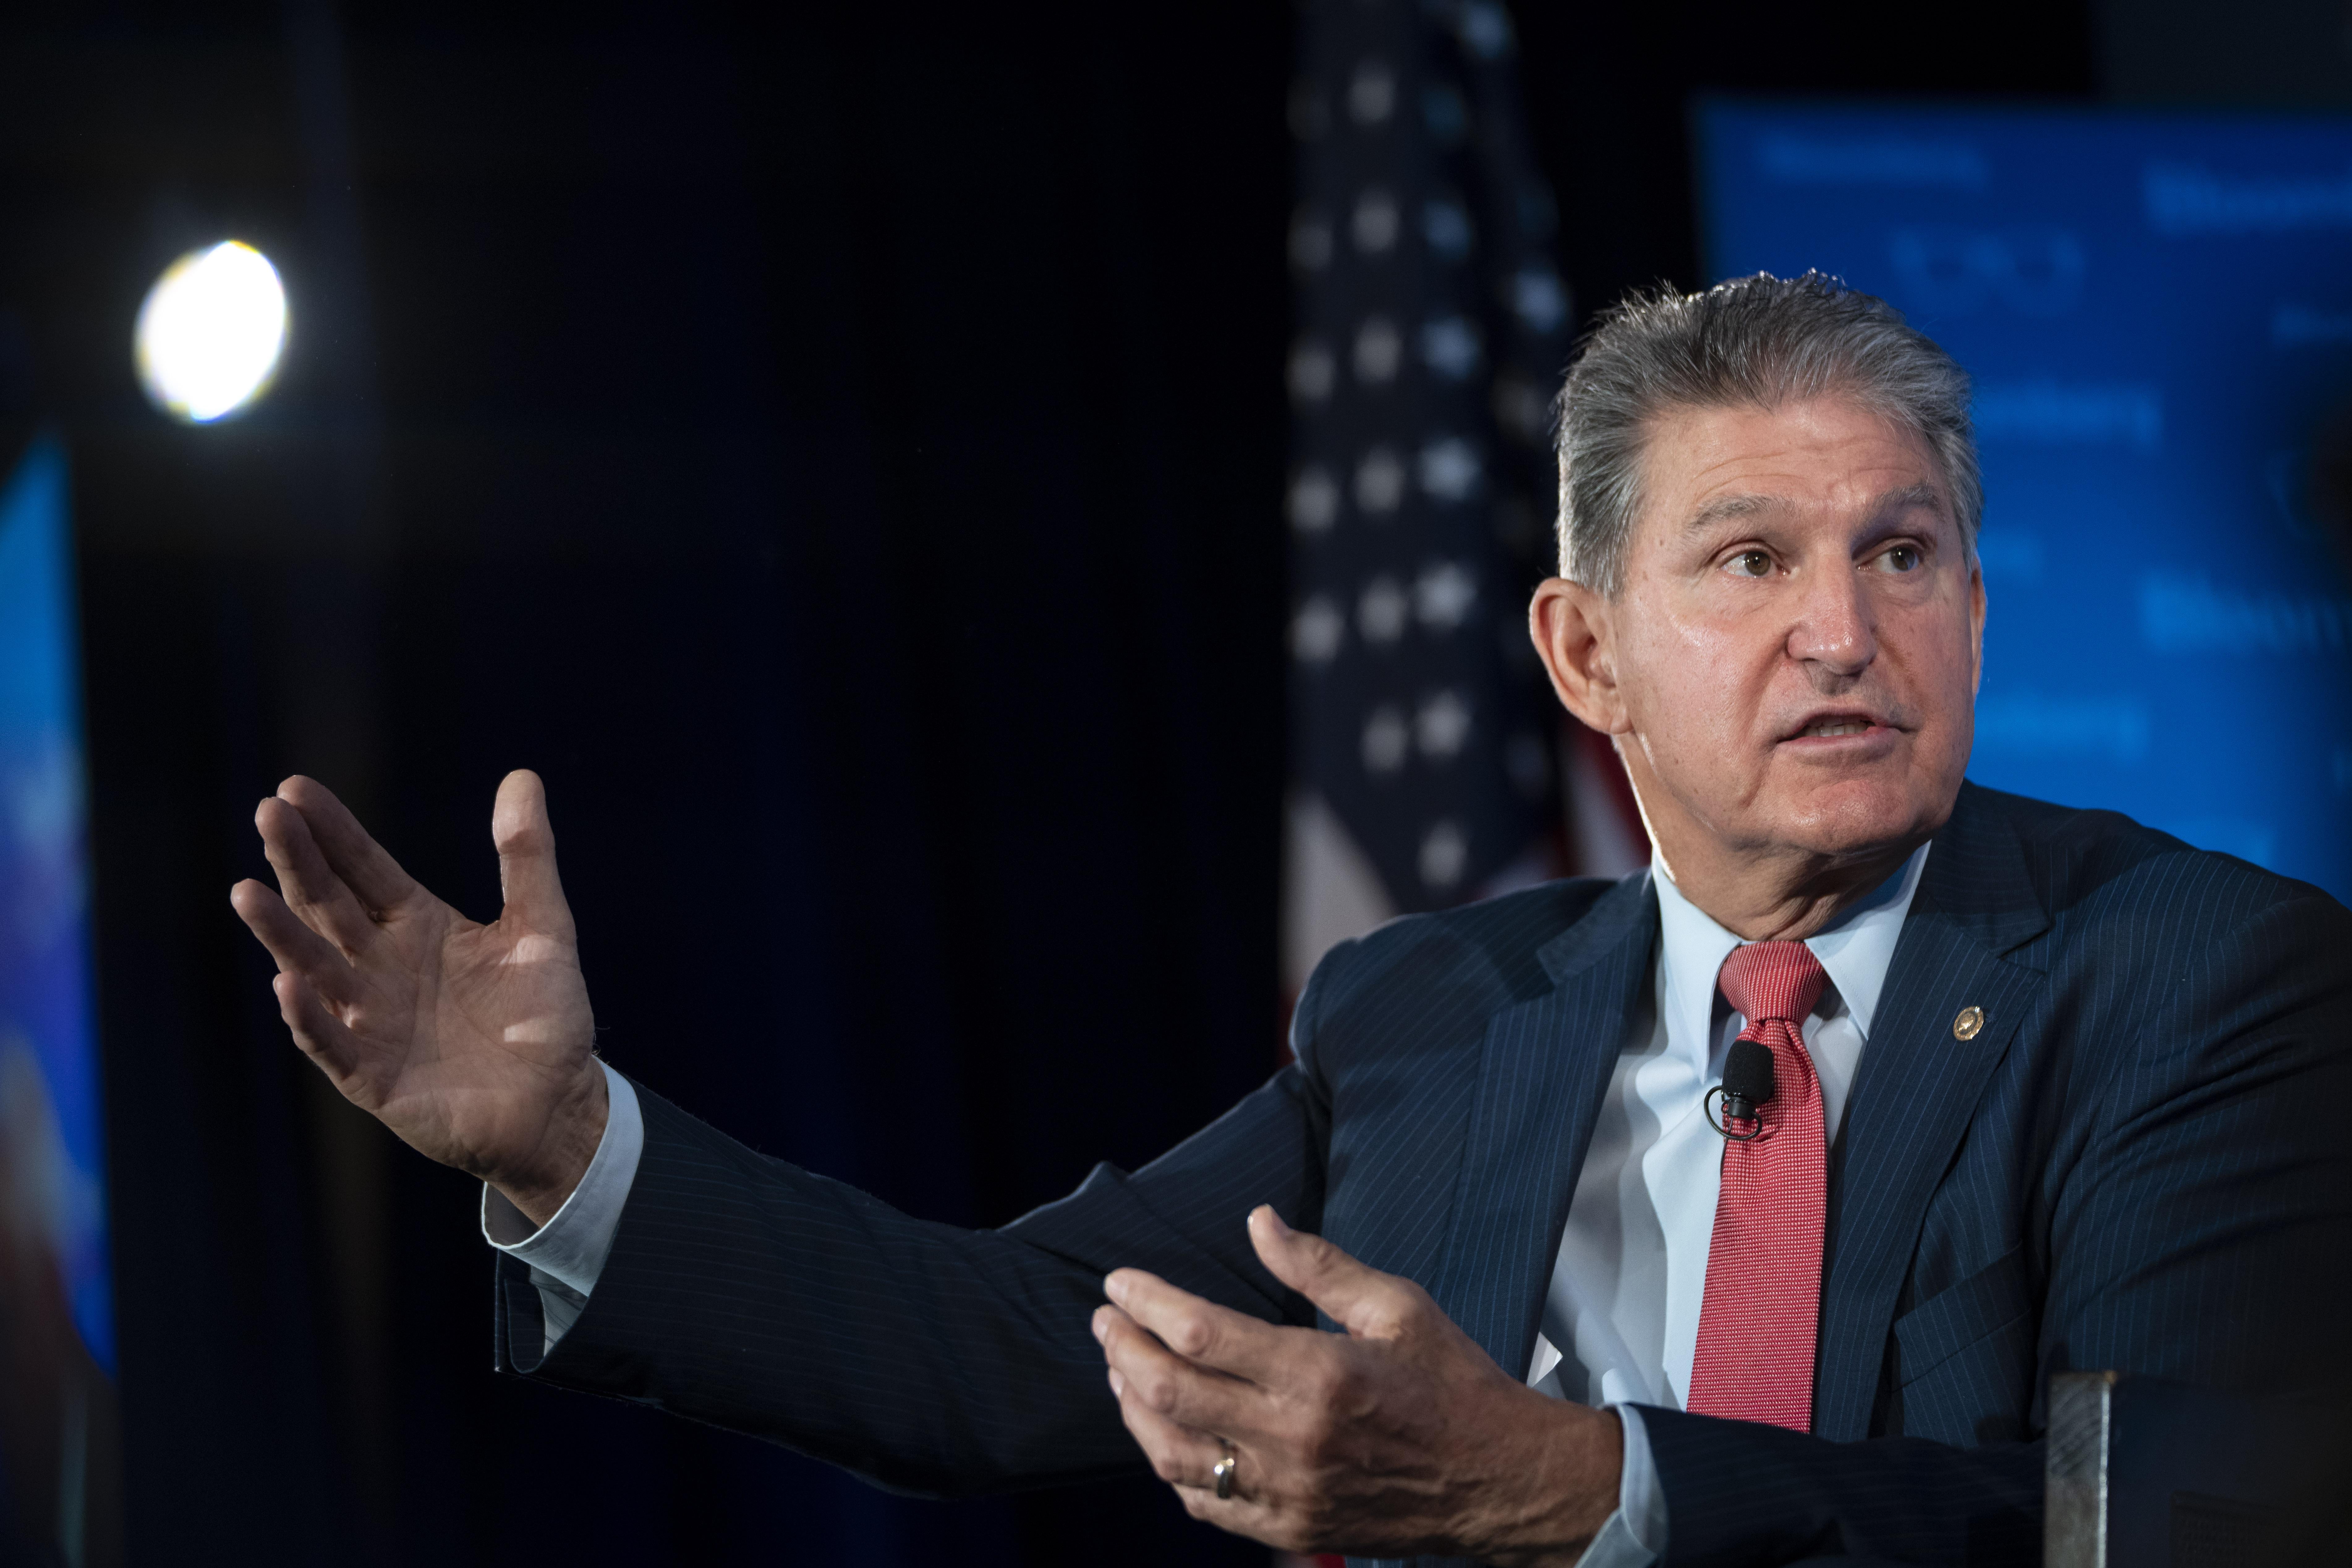 Manchin gestures with both hands as he speaks at an event